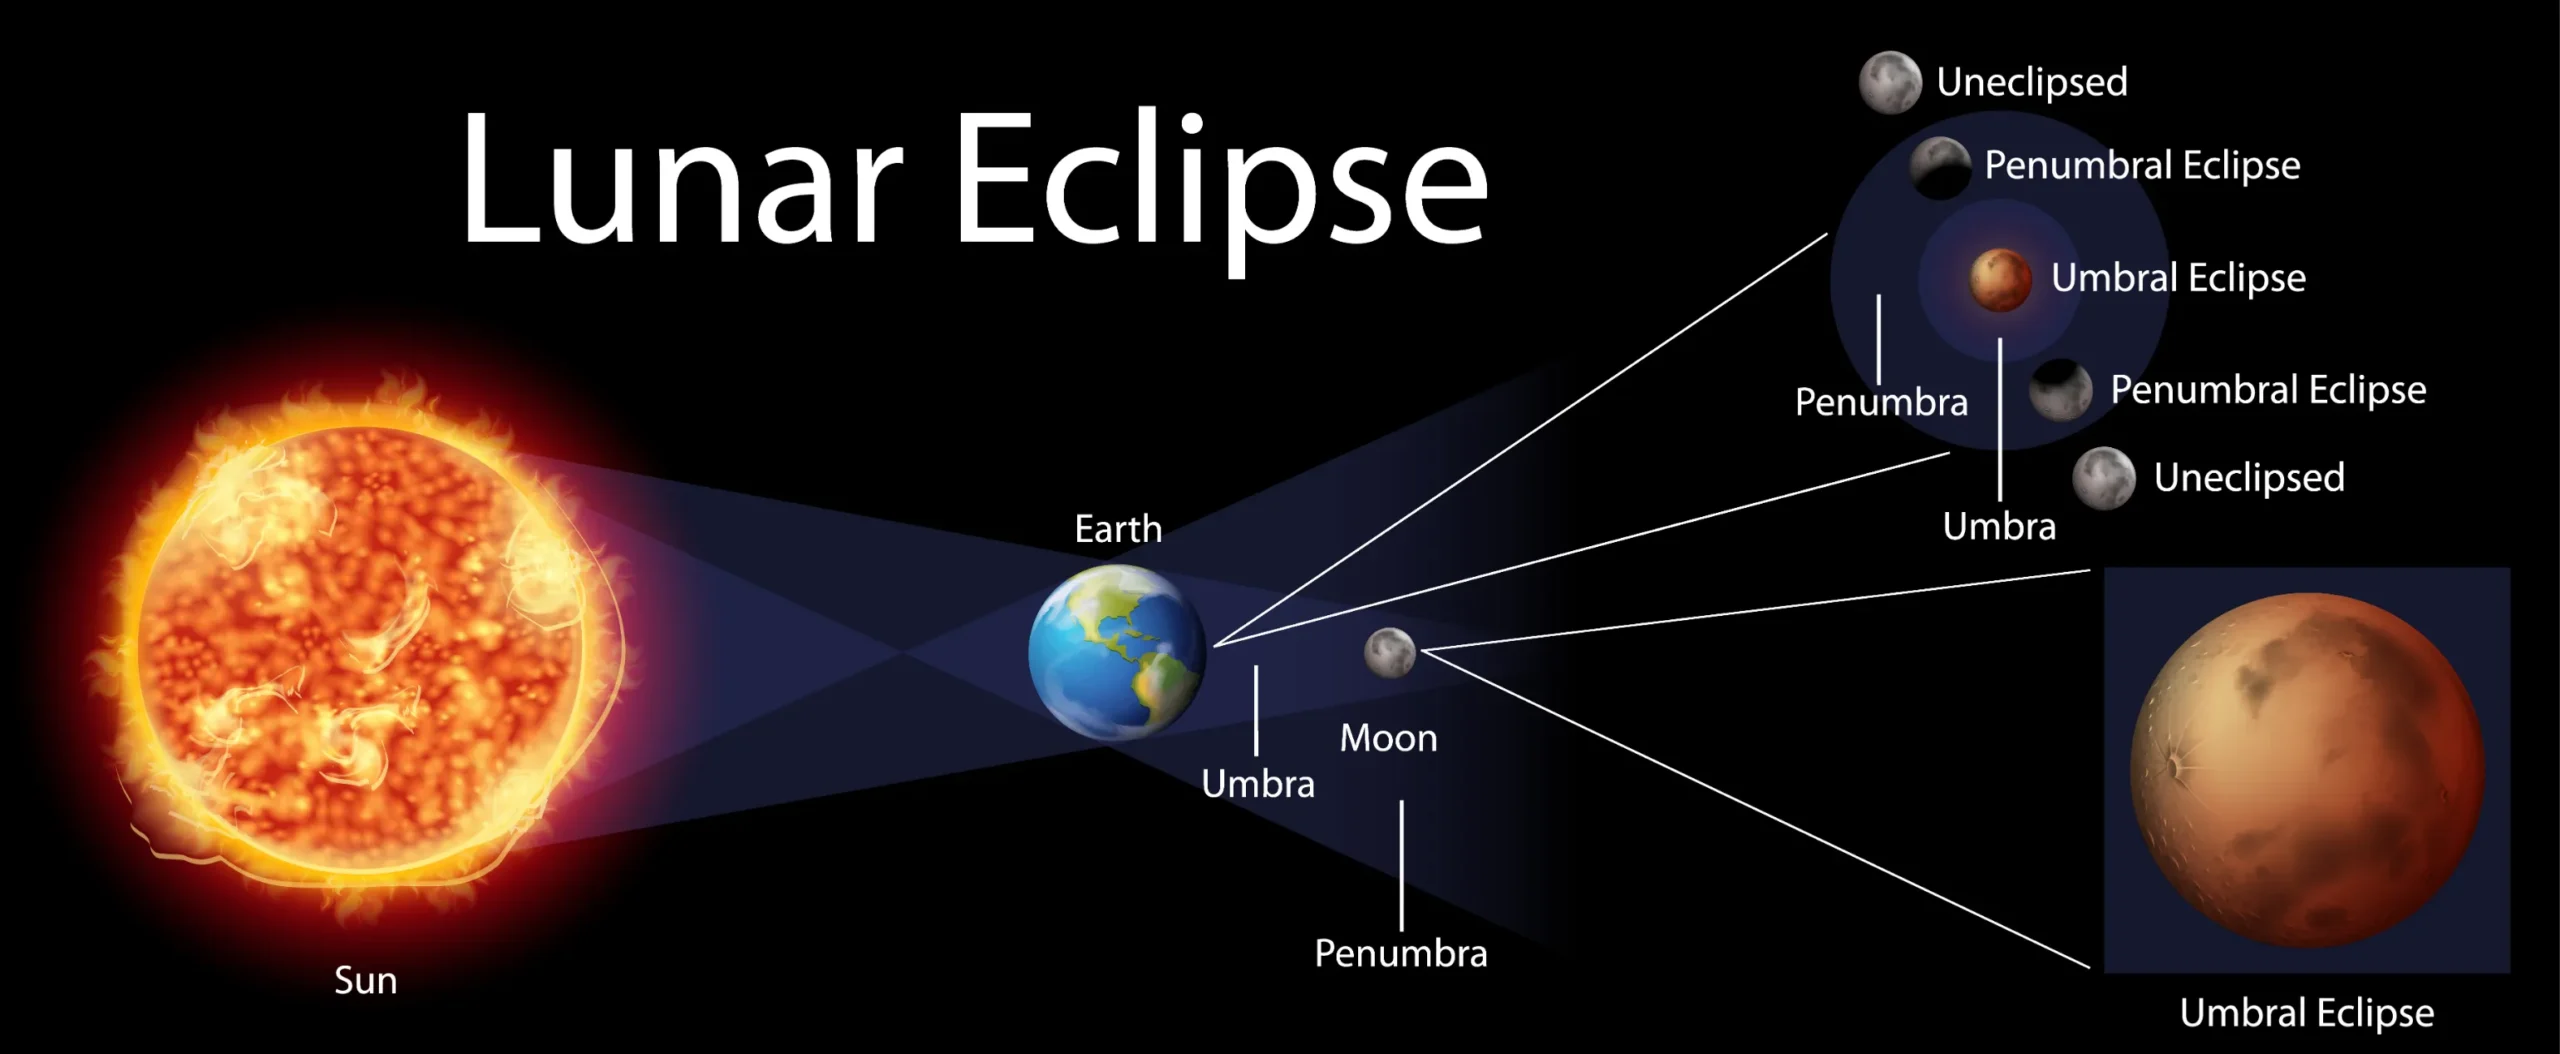 Diagram showing the science behind a lunar eclipse, with the Sun, Earth, and Moon labeled.